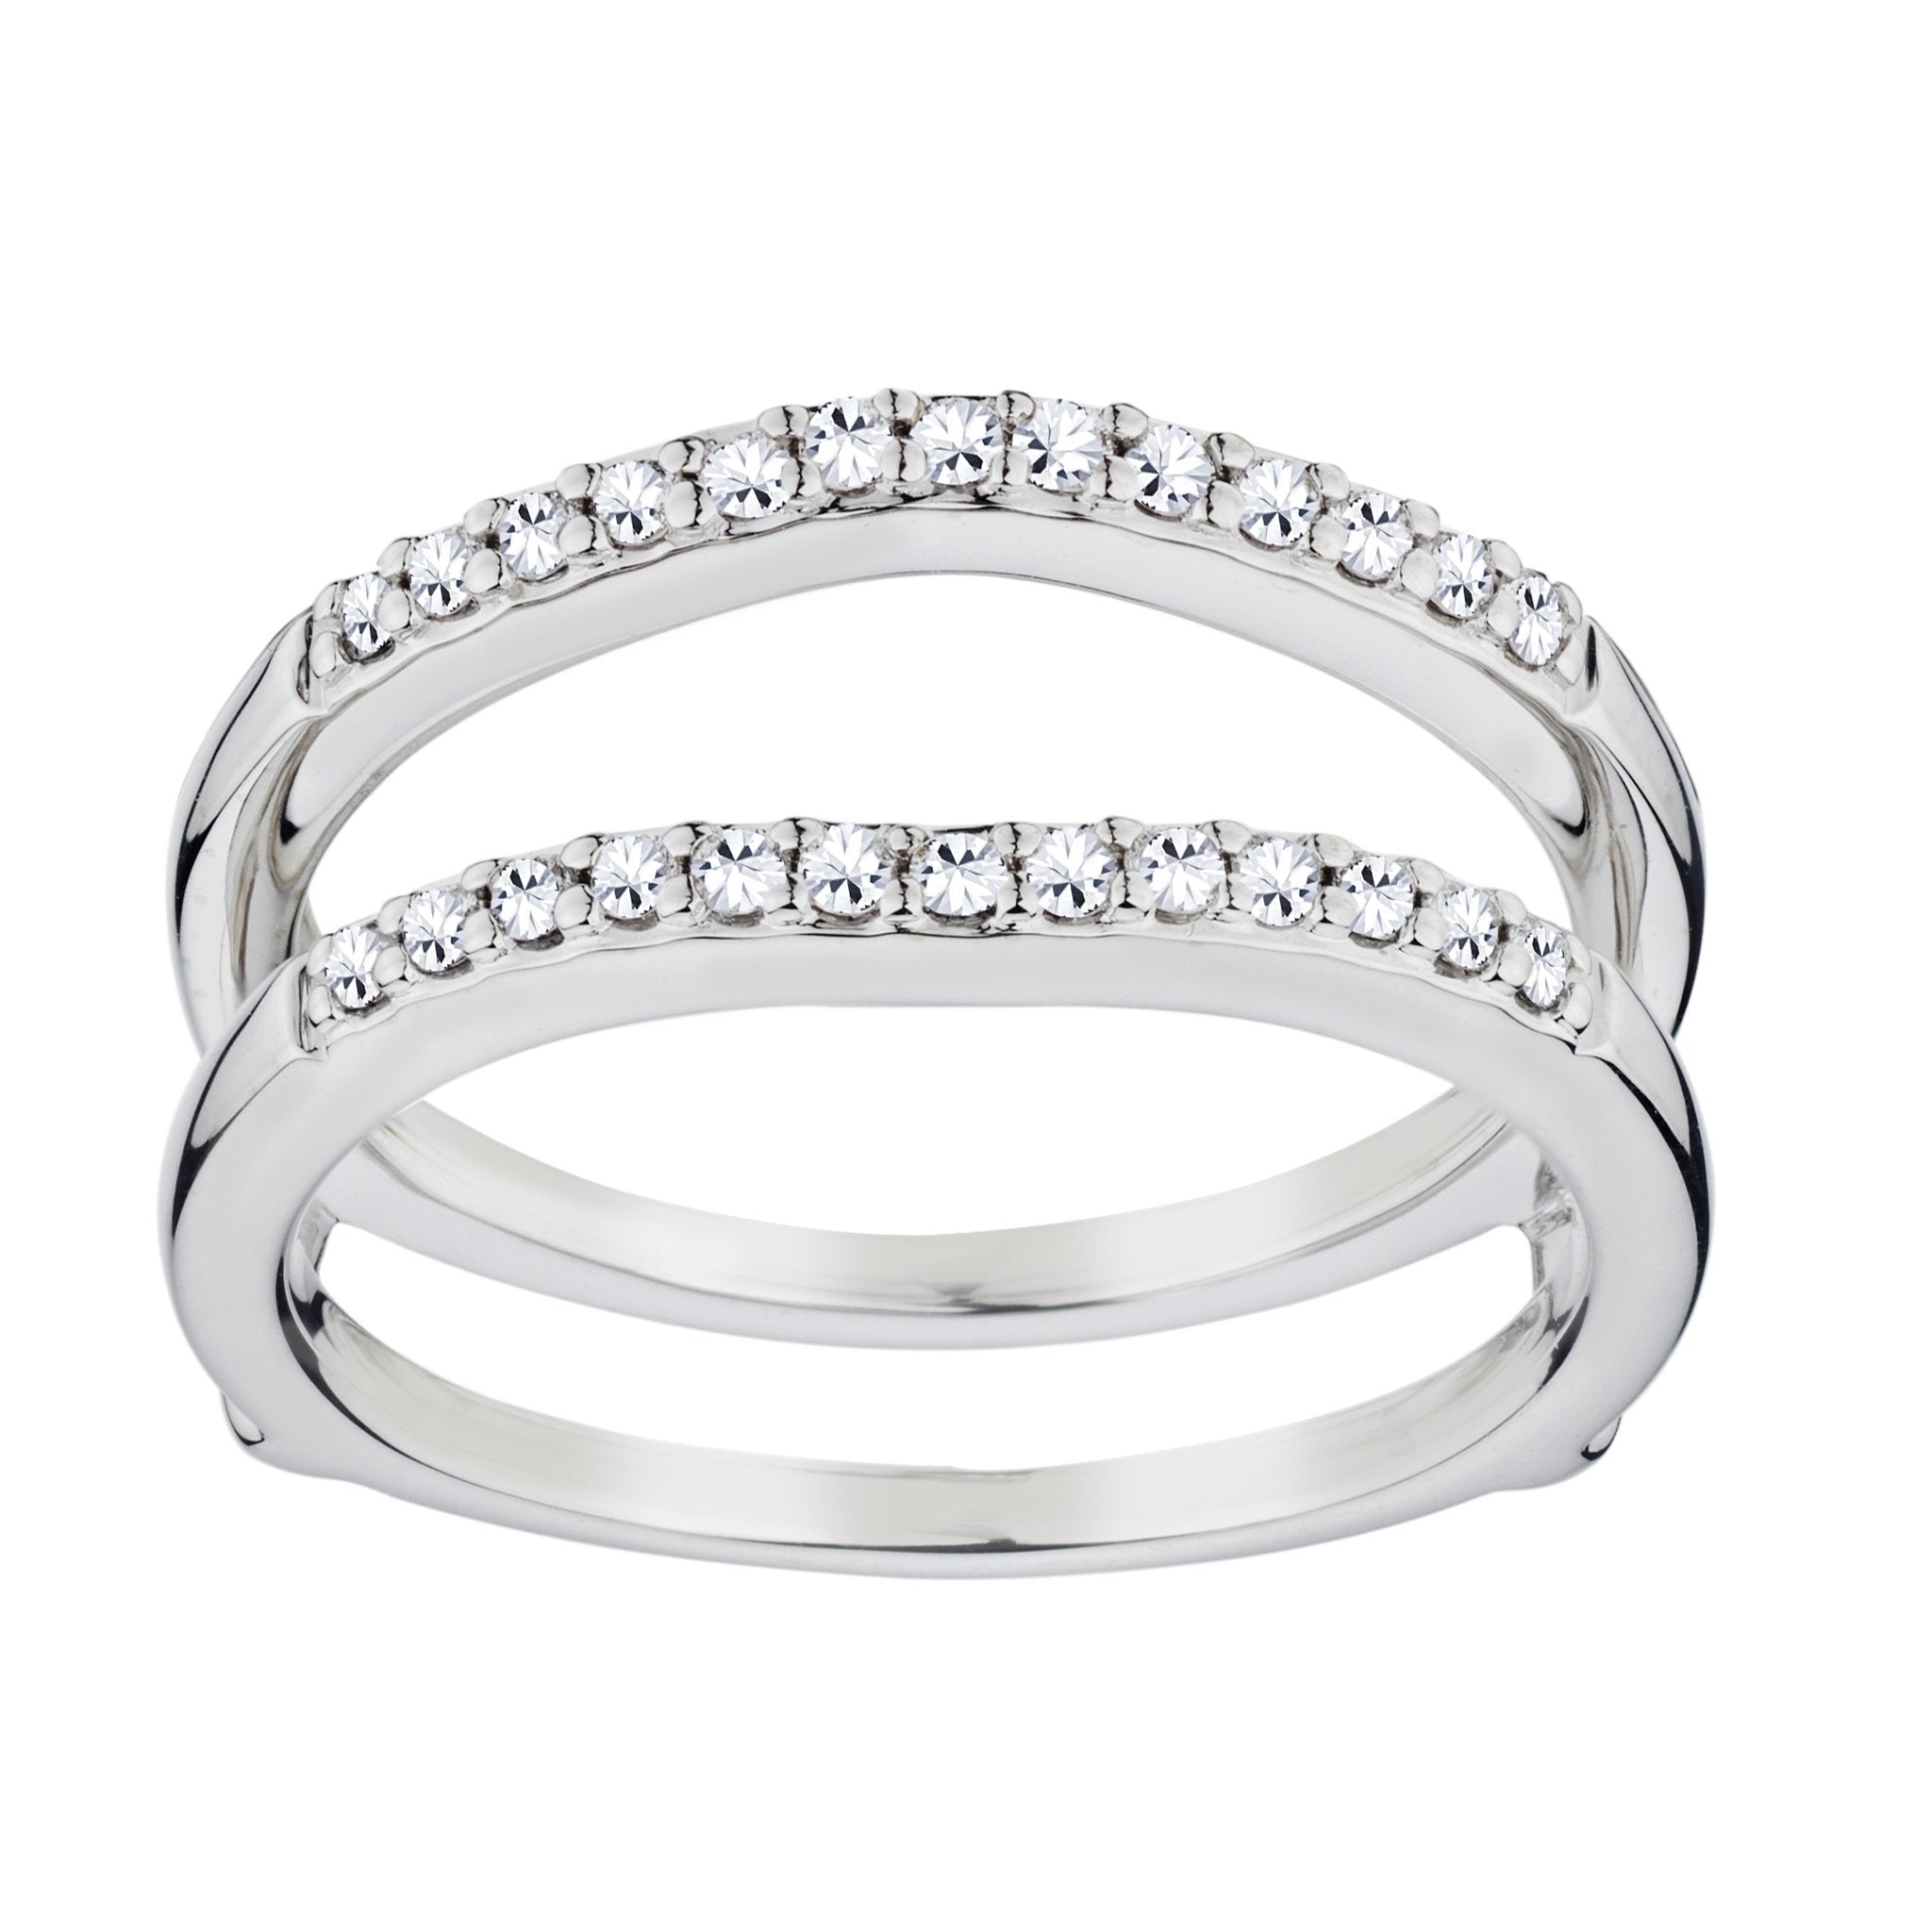 .25 CARAT DIAMOND JACKET WEDDING RING BAND, 14kt WHITE GOLD....................NOW - Griffin Jewellery Designs